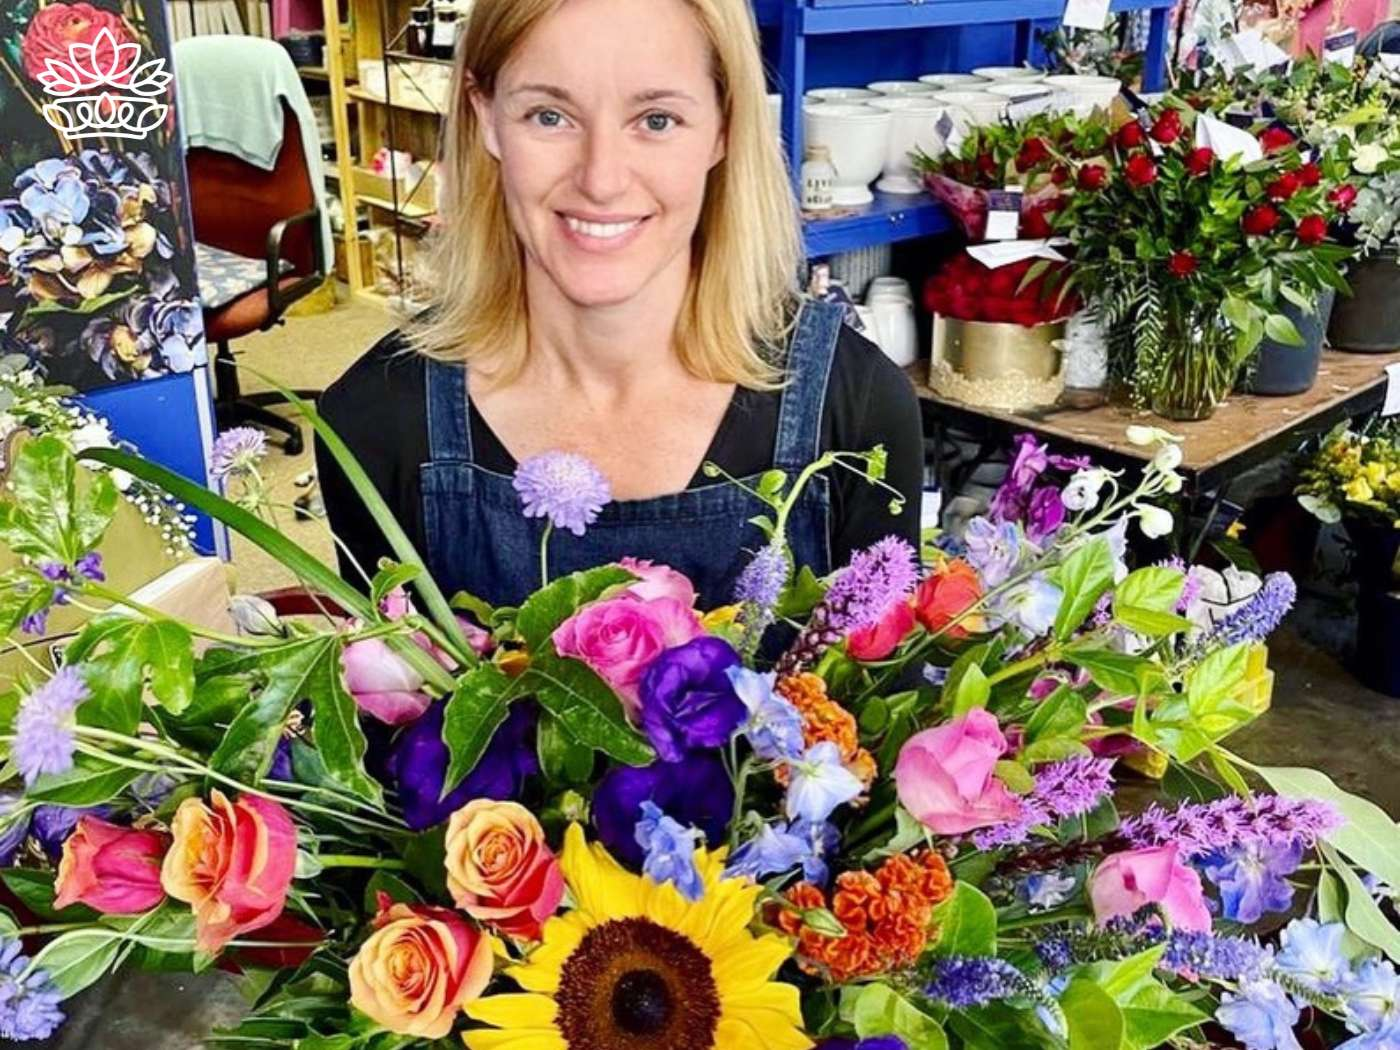 A cheerful woman, portrayed as a mom and florist, standing behind a lush and colorful bouquet featuring roses, sunflowers, and a variety of blooms in a flower shop. This image represents the dedicated delivery service enhancing life's special moments. Fabulous Flowers and Gifts.